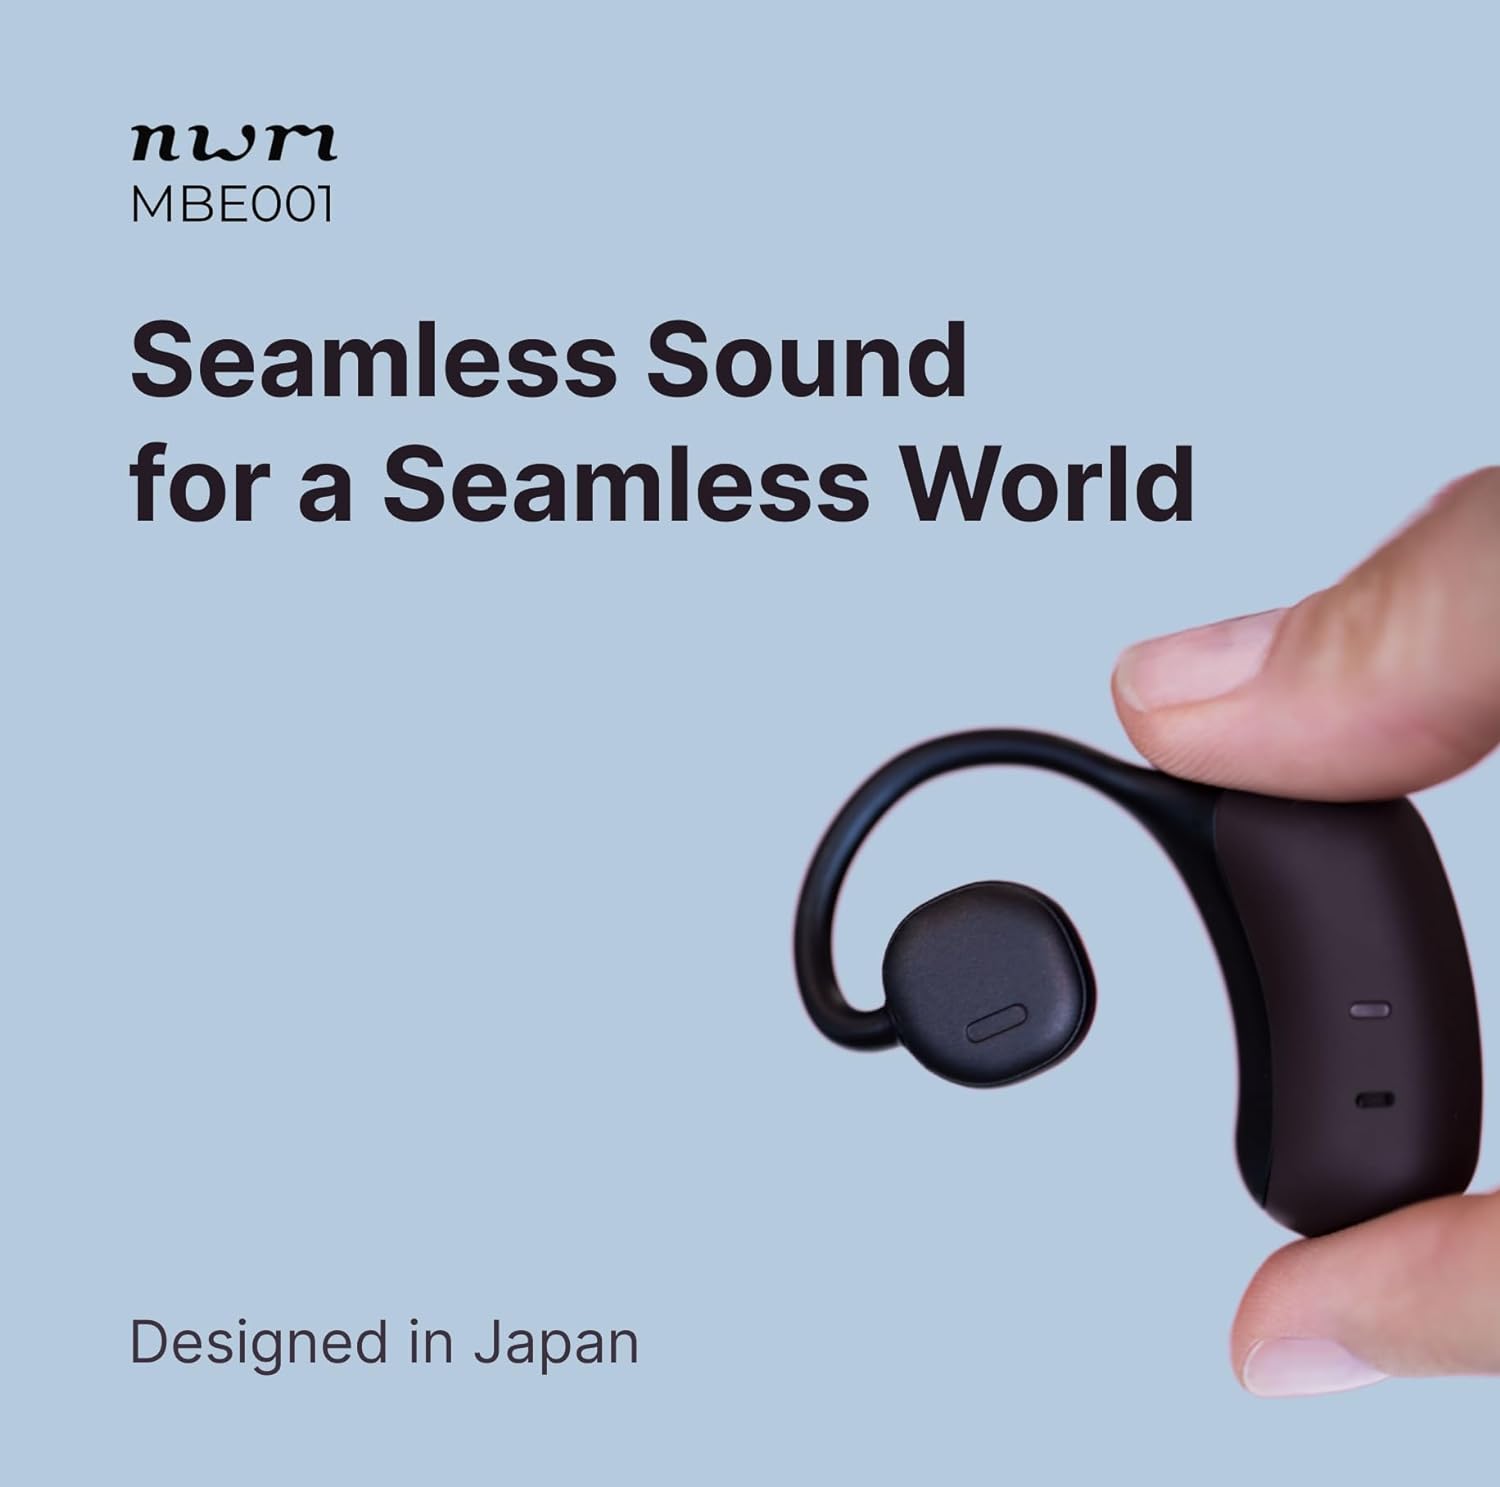 NTT sonority nwm Open Ear Earphones, Ear Spi, No Blocking Ears, Fully Wireless, Nwm MBE001 / Bluetooth 5.2 OWS PSZ Technology, Multi-Point Connection, AptX Compatible, Air Conduction, External Sound